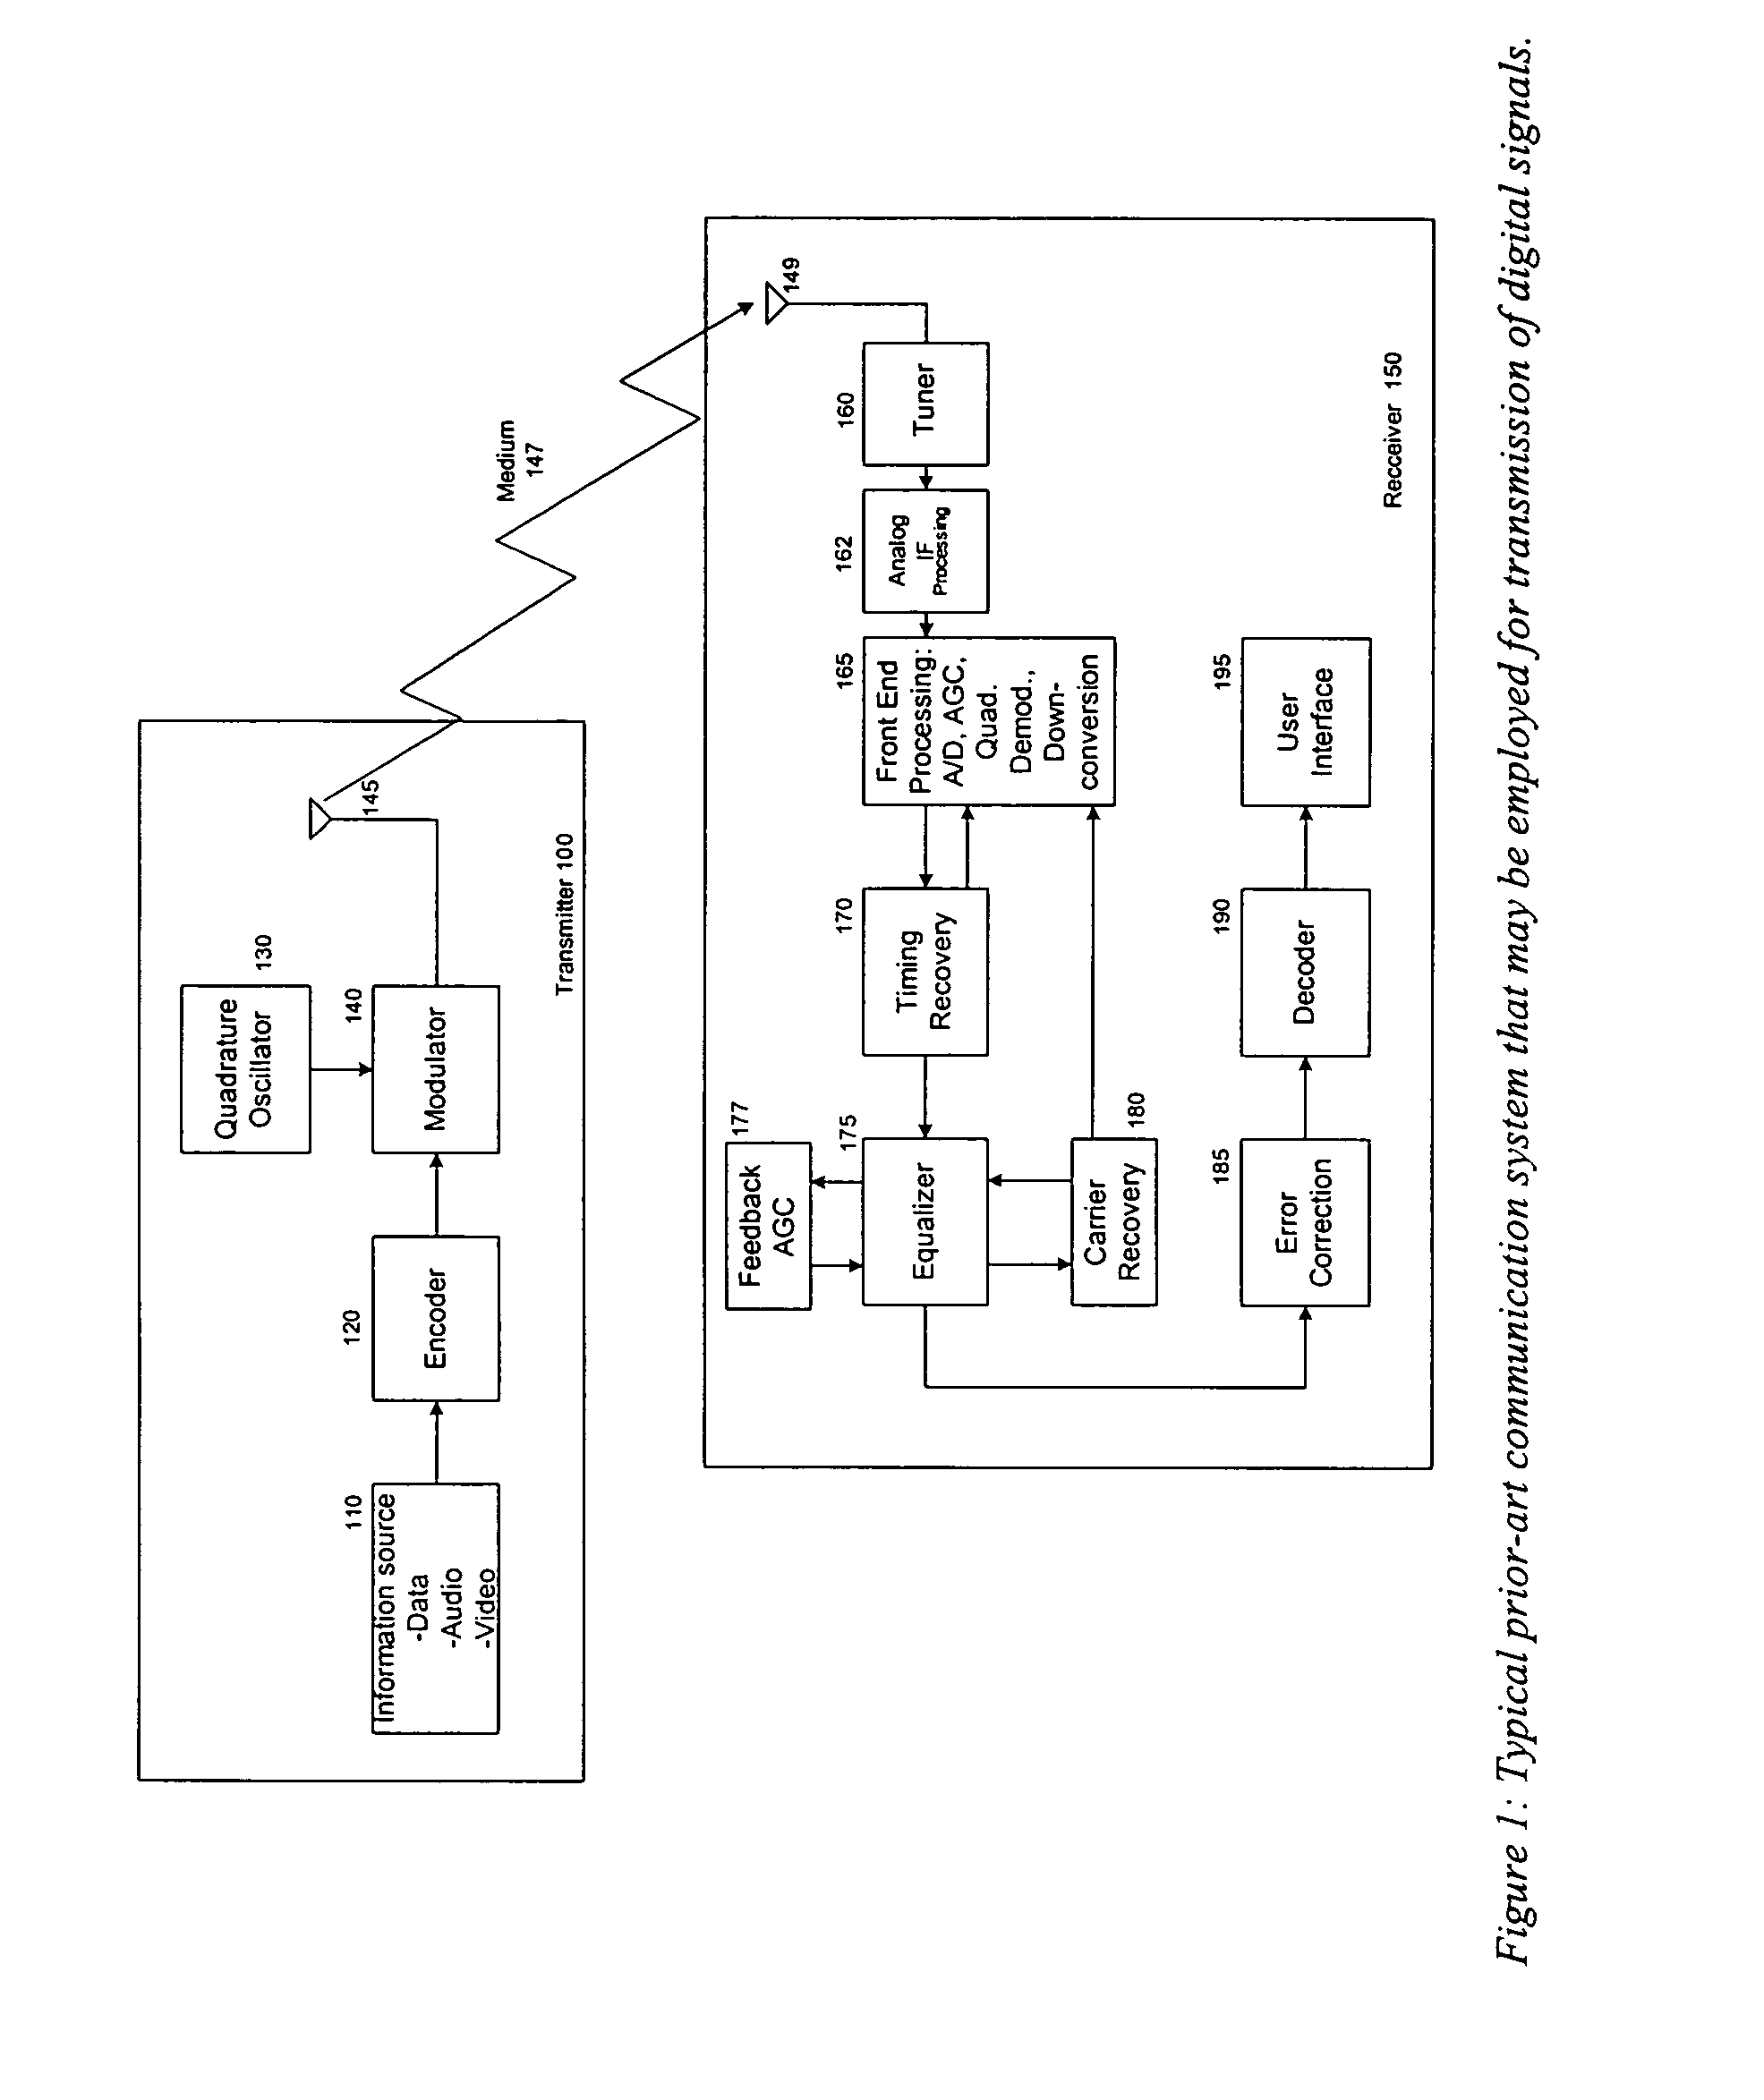 Joint, adaptive control of equalization, synchronization, and gain in a digital communications receiver